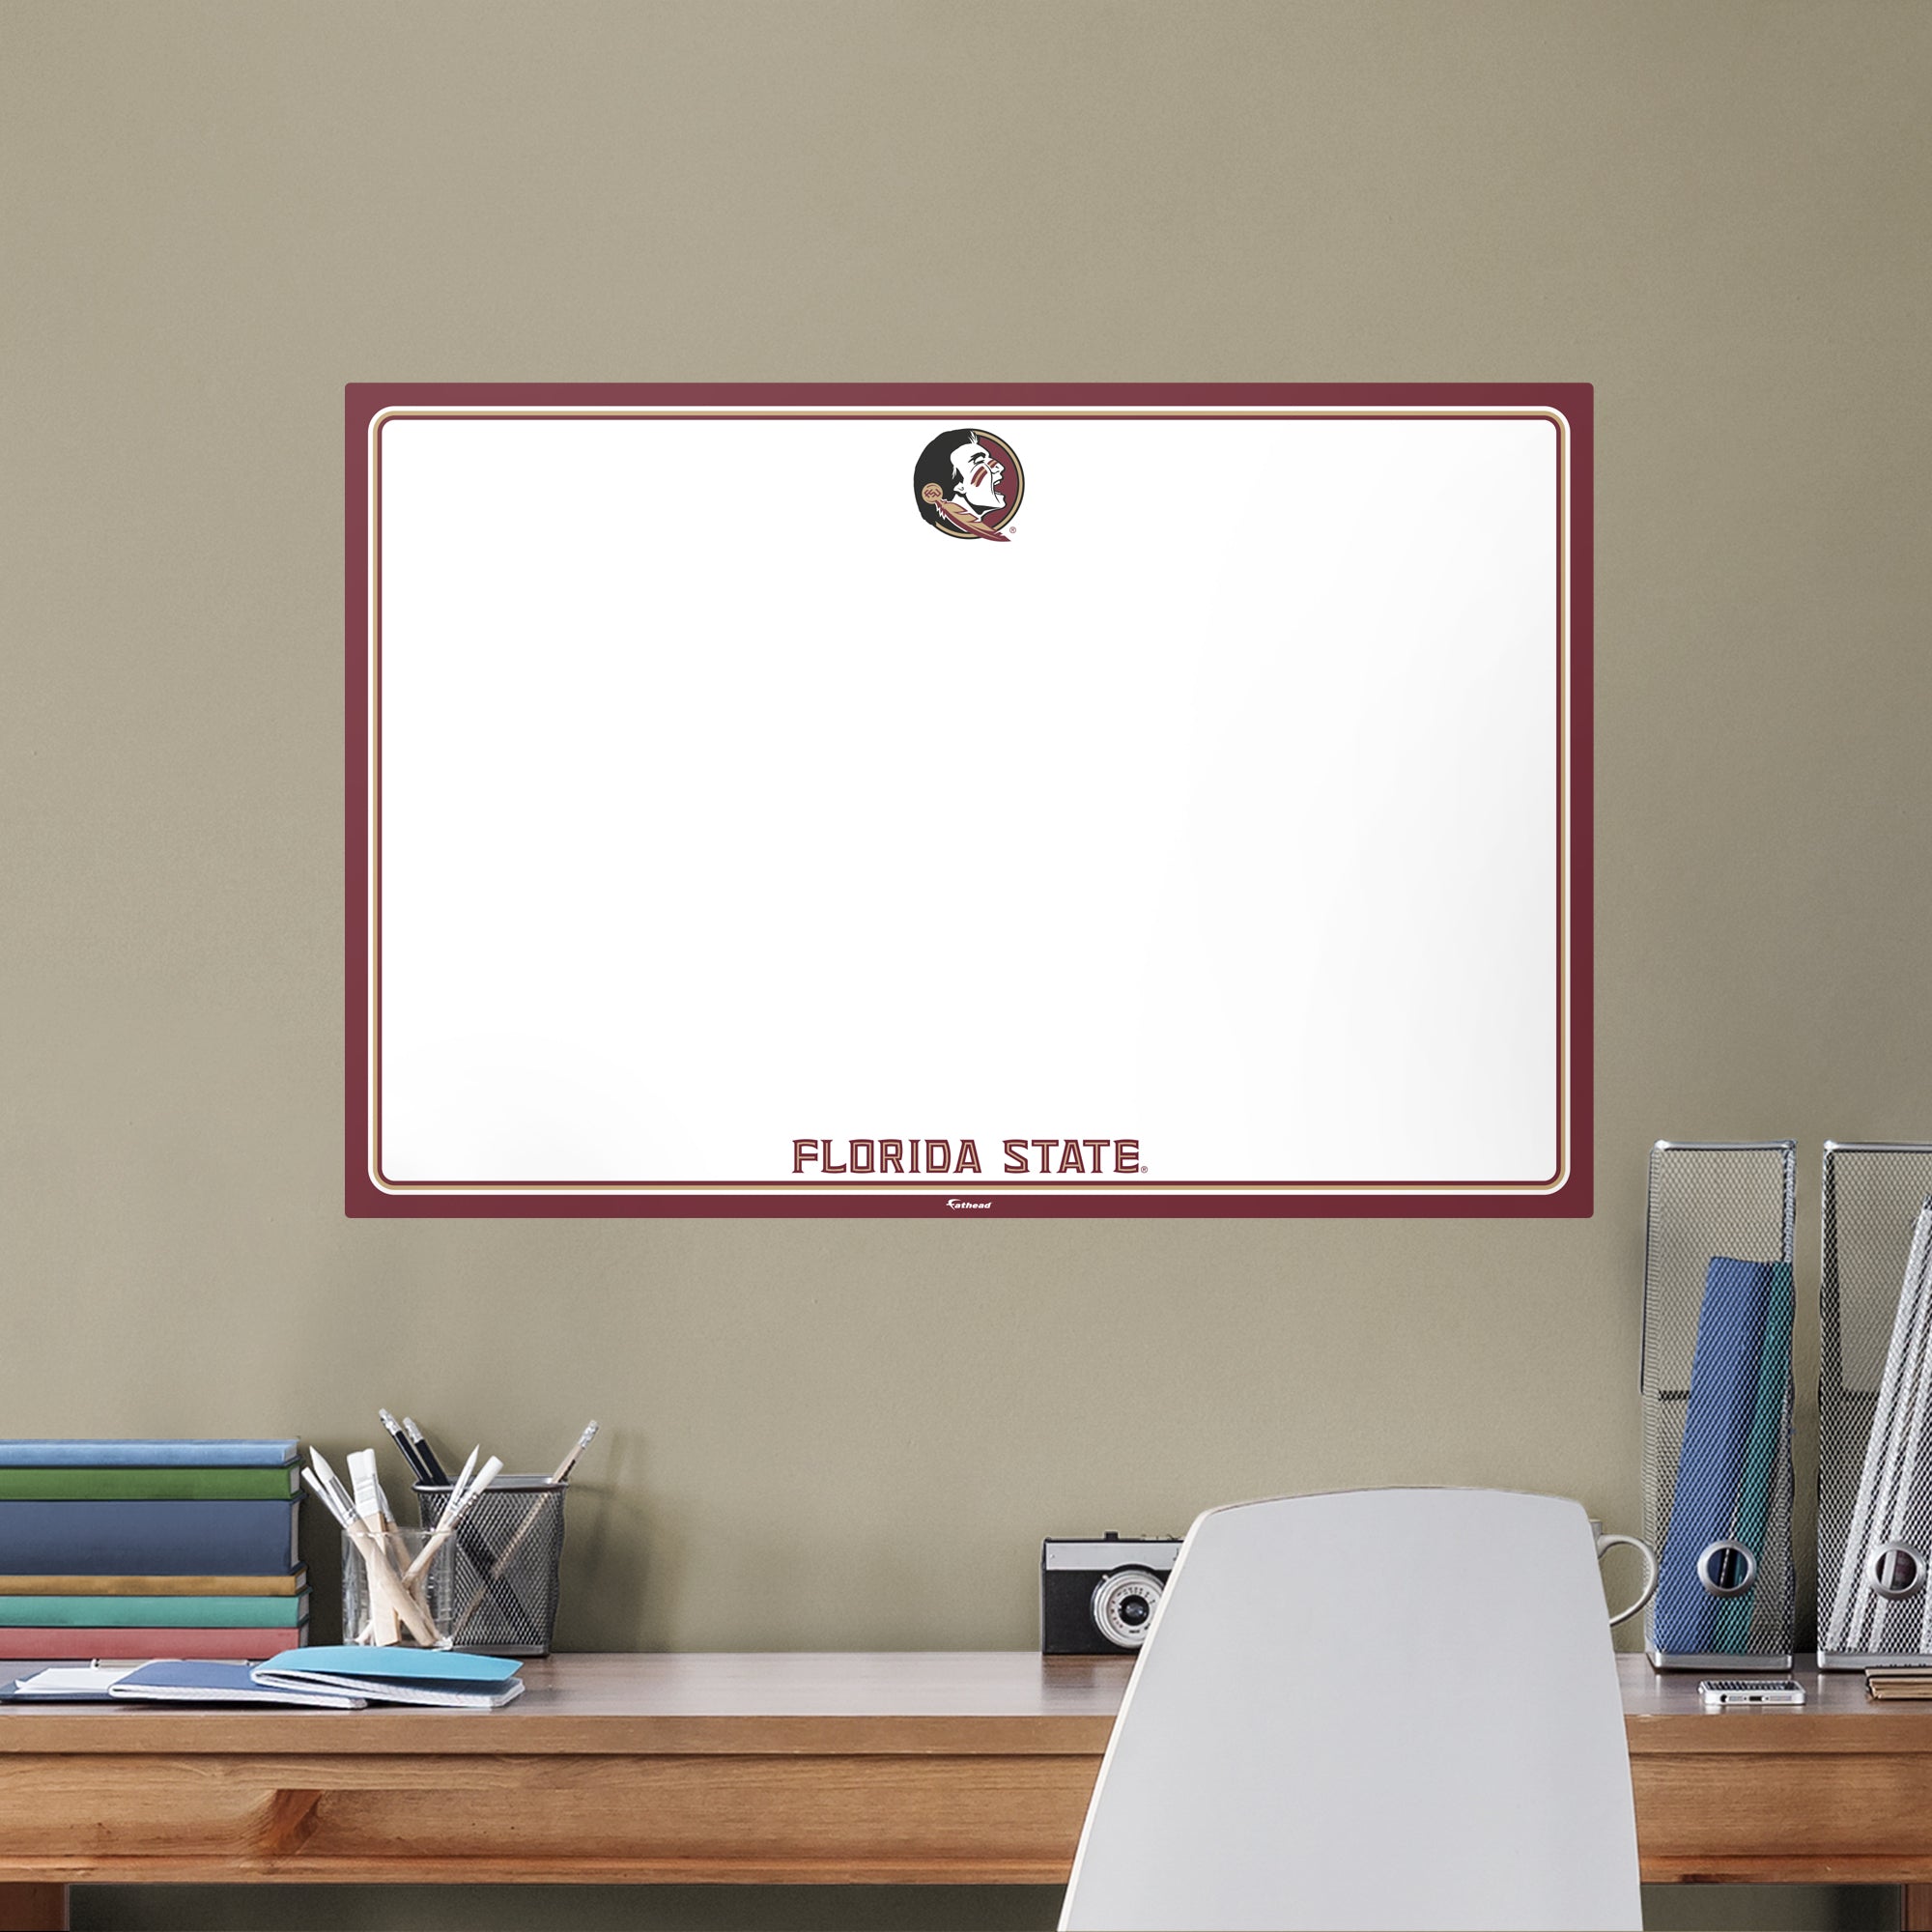 Florida State Seminoles: Dry Erase Whiteboard - X-Large Officially Licensed NCAA Removable Wall Decal XL by Fathead | Vinyl